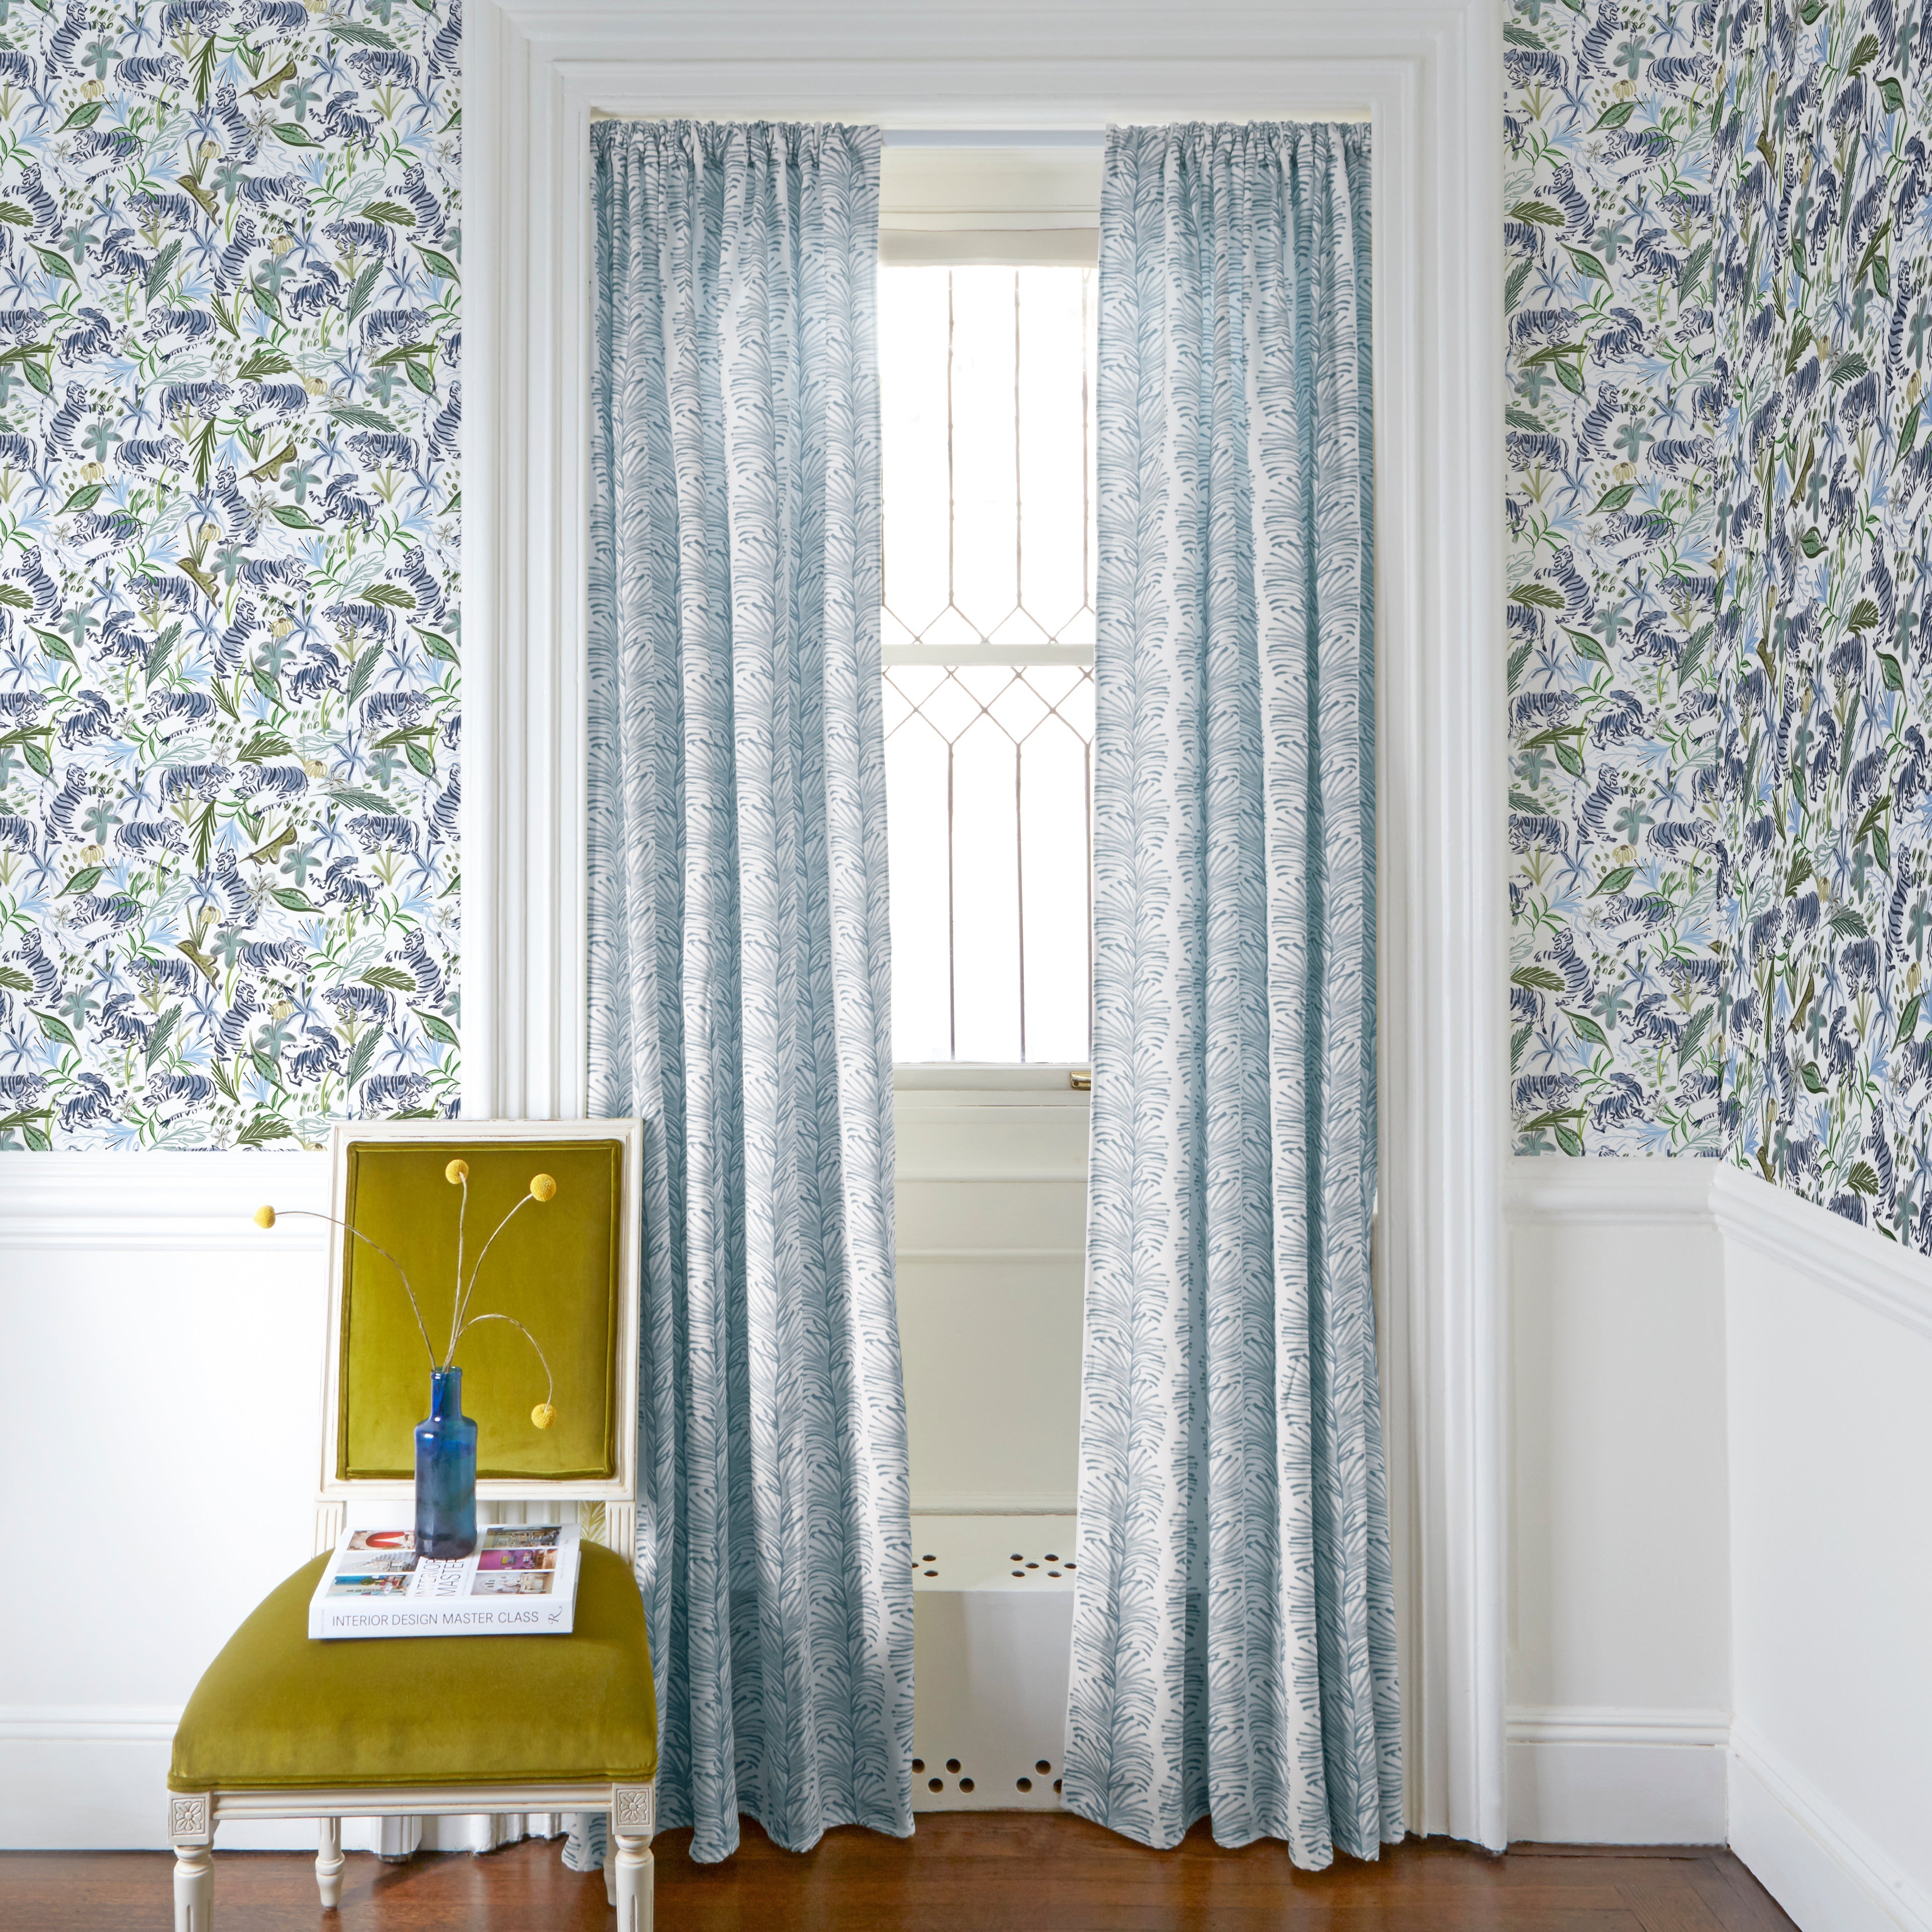 Sky Blue Botanical Stripe Printed Curtains on white rod in front of an illuminated window with Green Tiger Printed Wallpaper by Mustard Yellow Velvet chair with plants in blue clear vase on top of white book